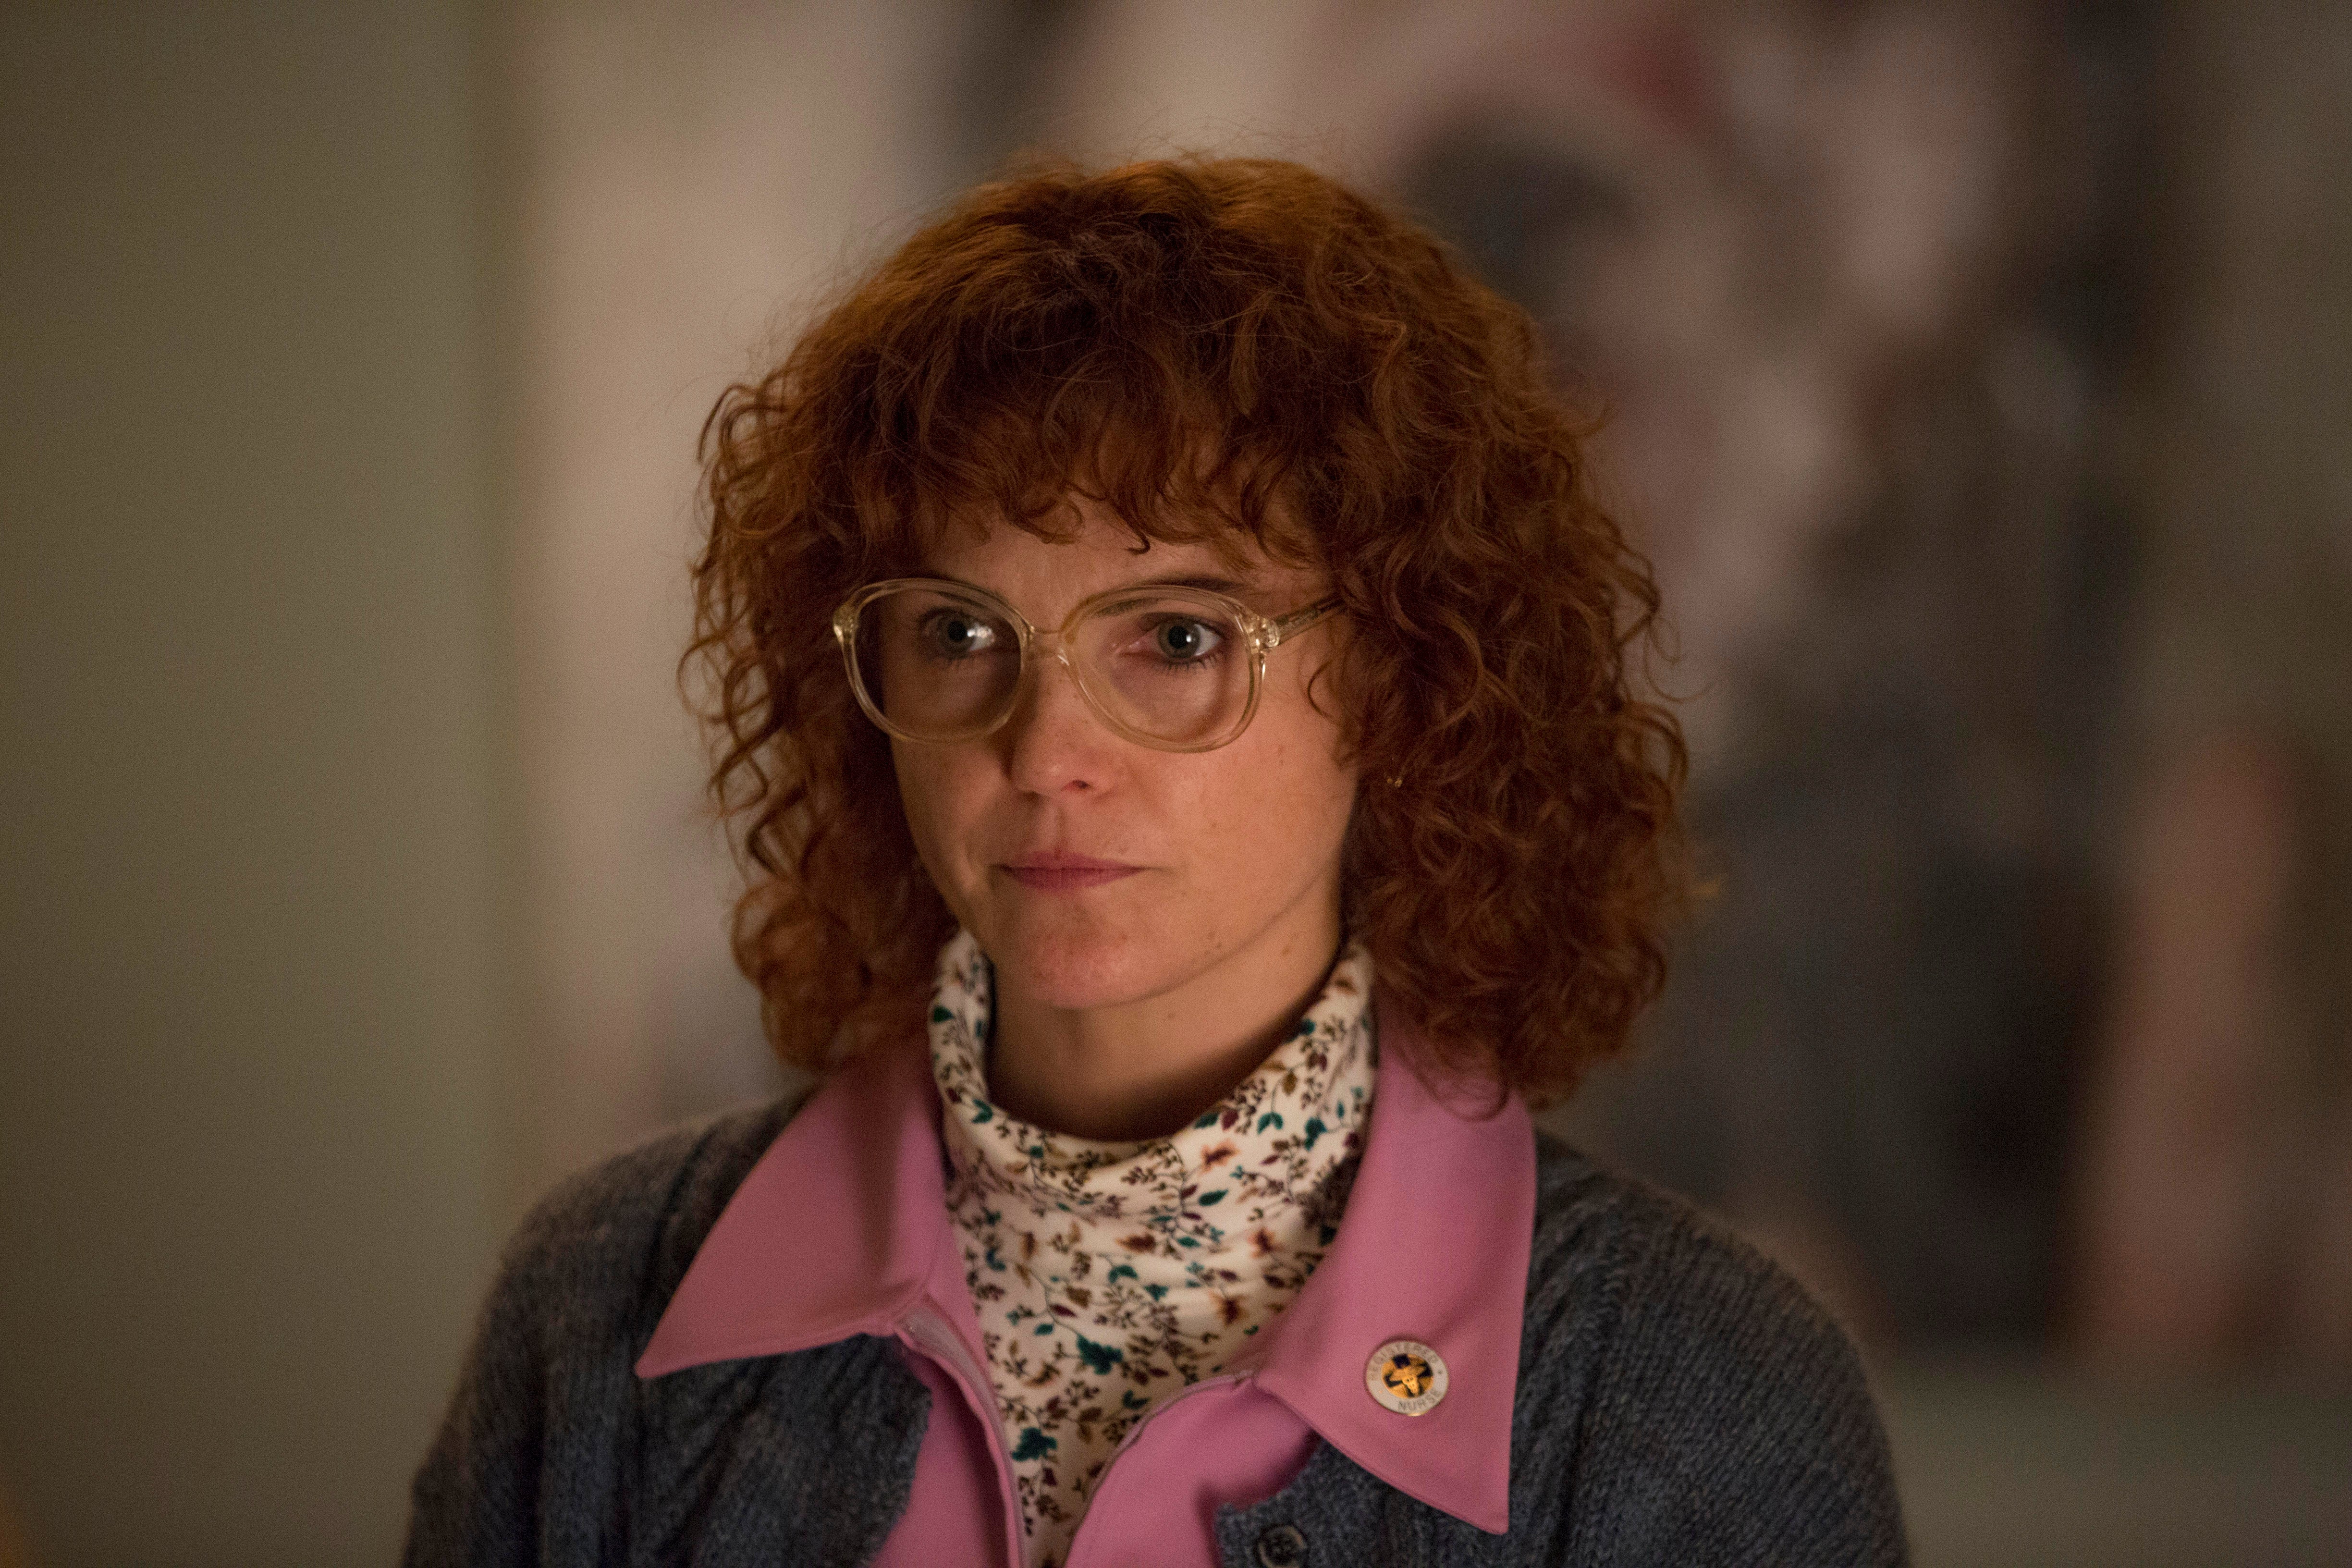 Keri Russell plays Elizabeth in The Americans. In this still, Elizabeth is in disguise as Stephanie, a dowdy home care nurse. She wears big, round glasses, a crazy-curly redhead wig, and a speckle-patterned white fluffy turtleneck under a pink-collared denim shirt.